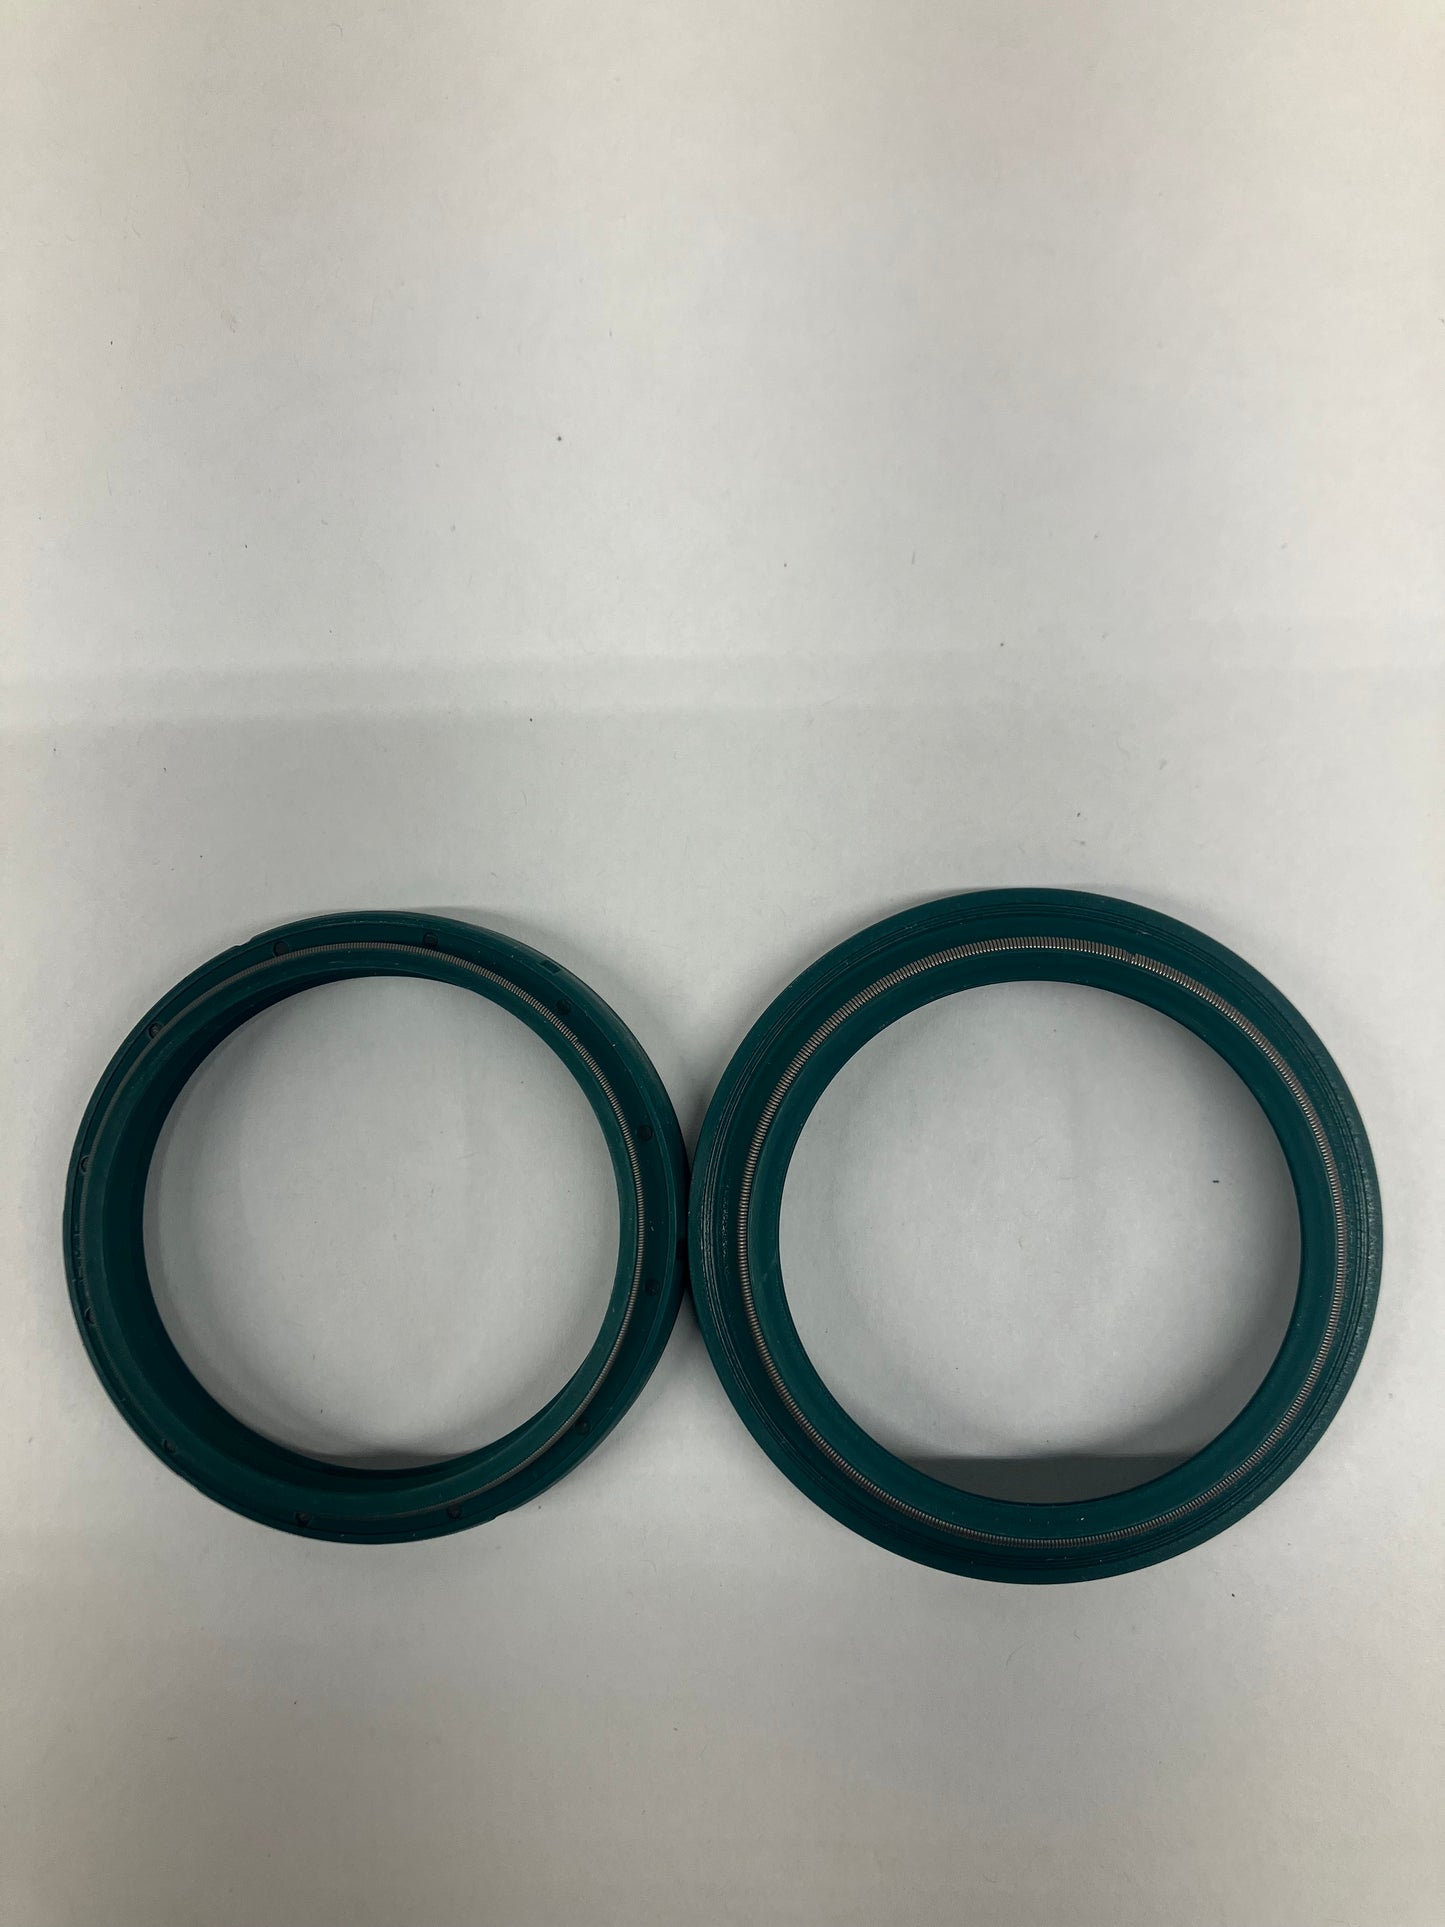 SKF Green  Fork Seals for WP